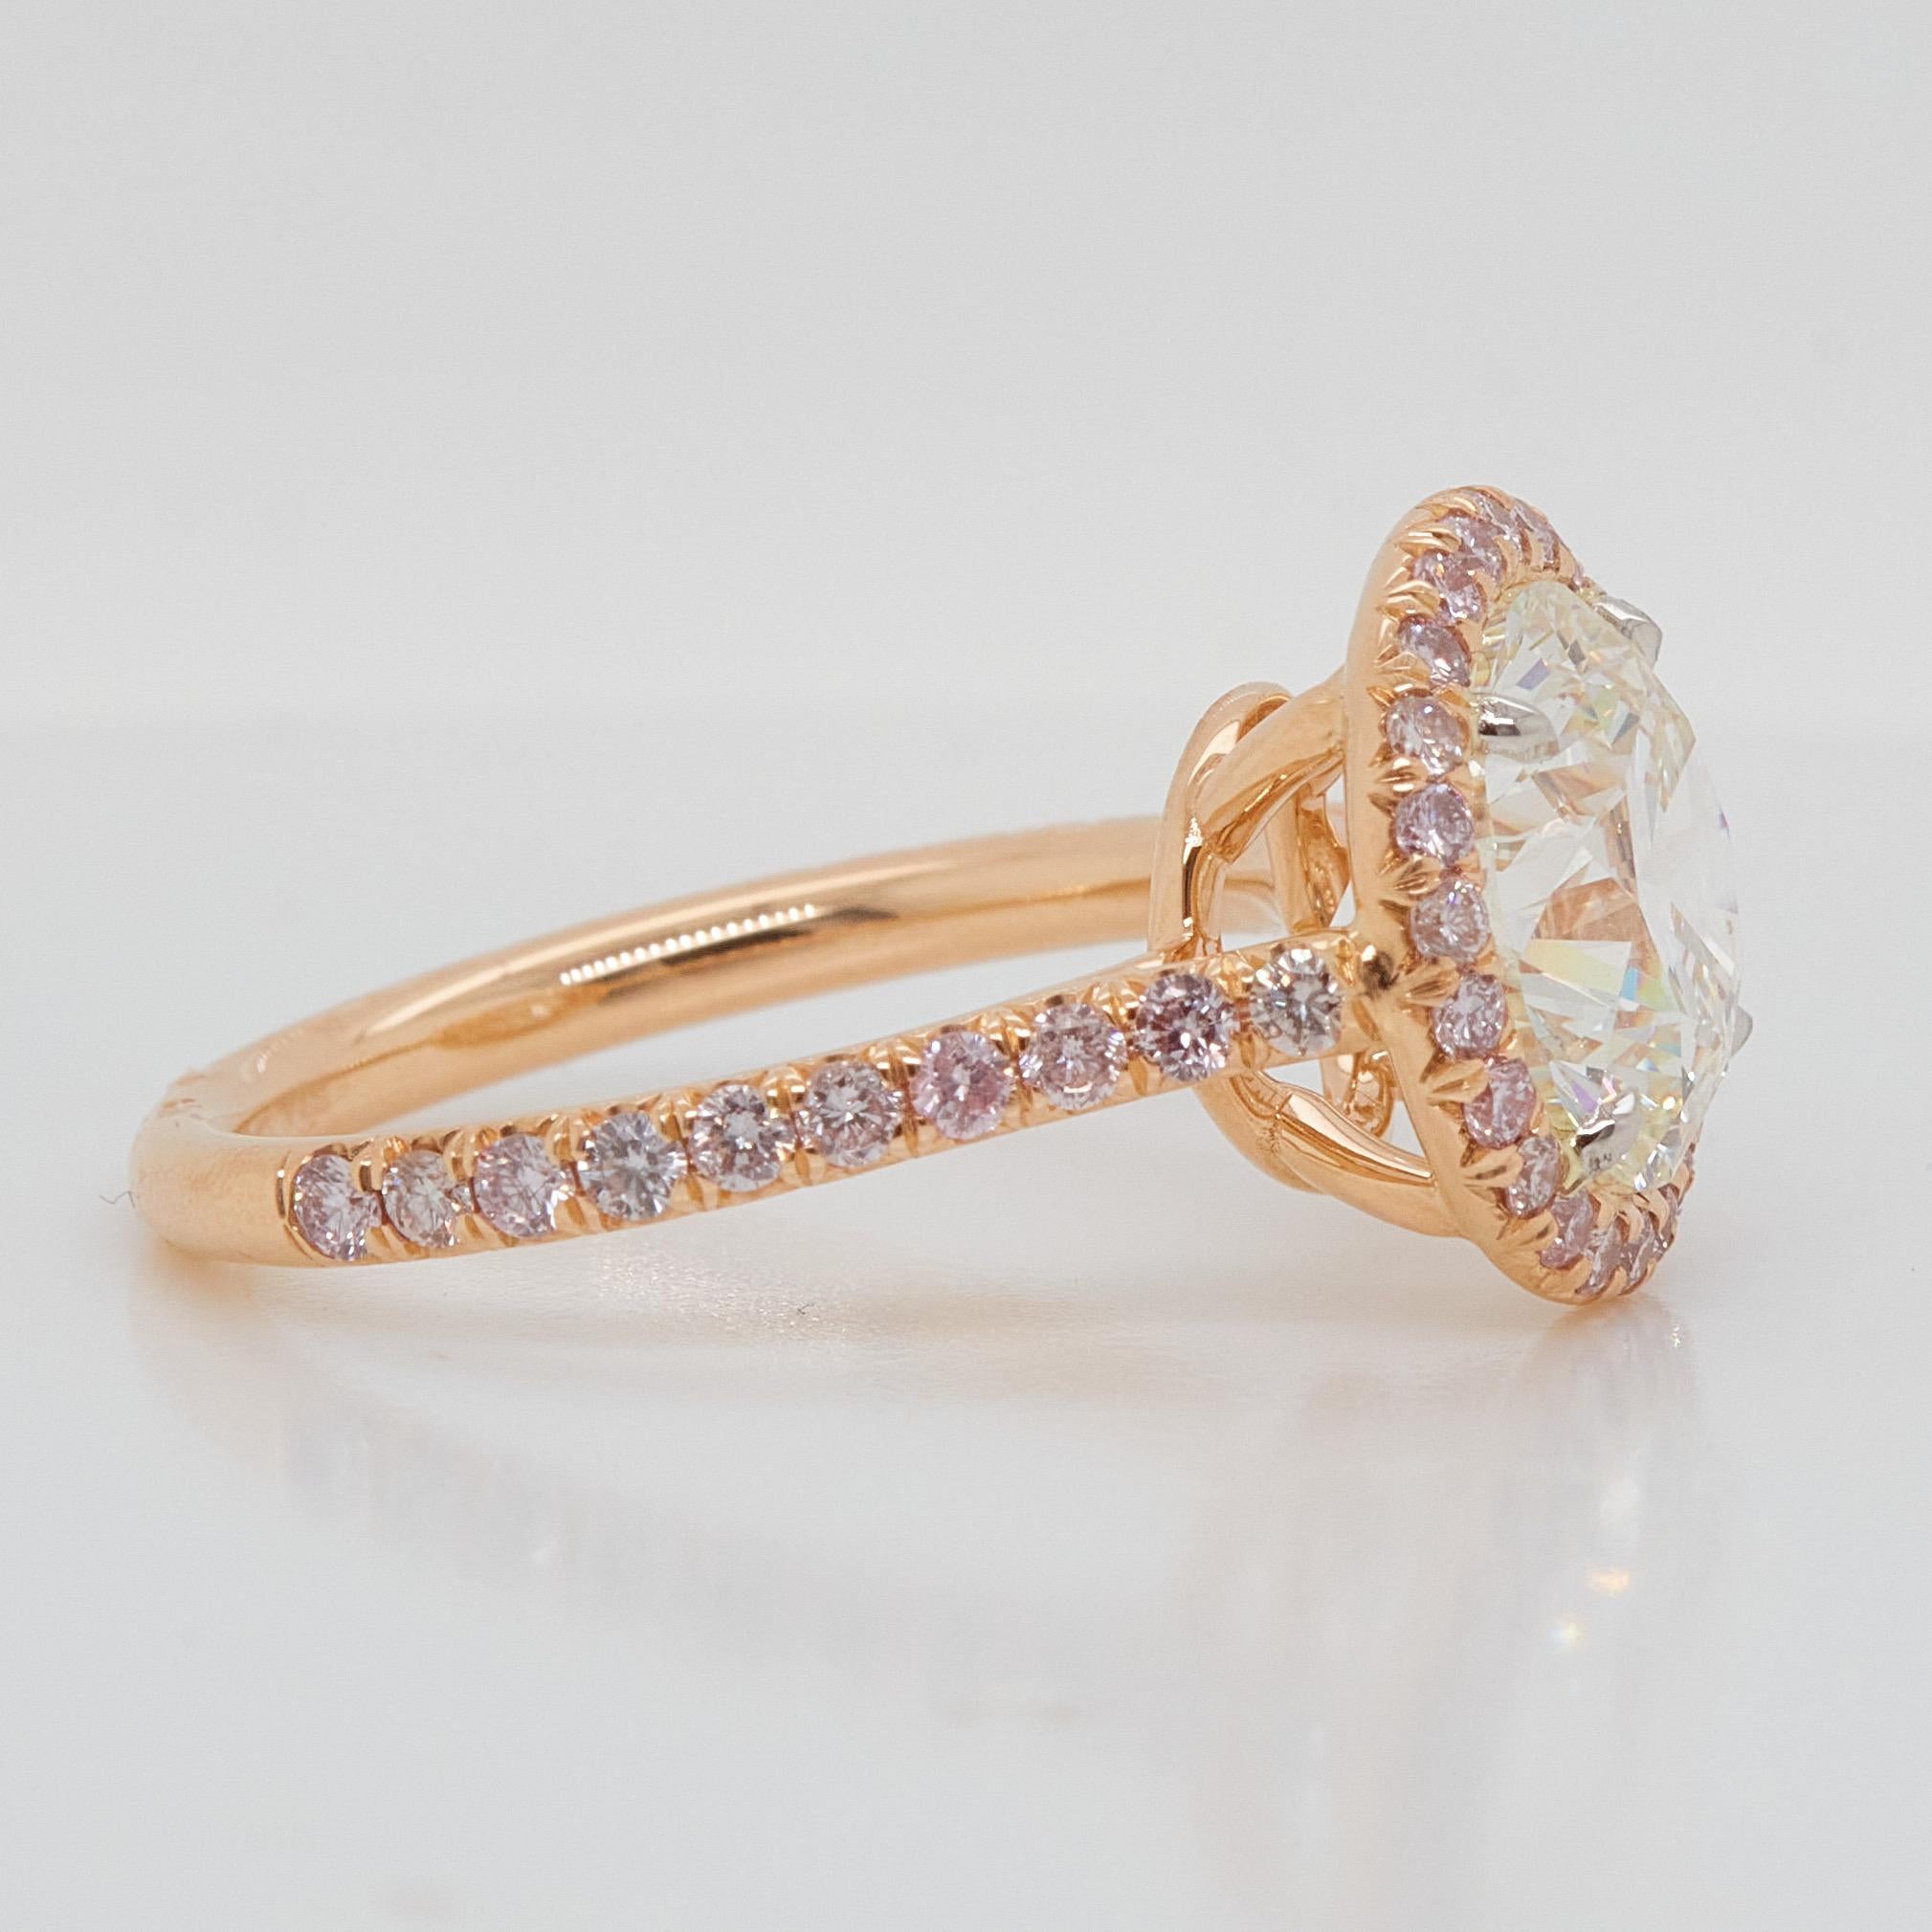 Engagement ring style showcasing a 3.5 carat cushion cut diamond certified by GIA as J color, SI1 clarity. The classic design brings out the beauty of the center stone with the surrounding 44 round pink diamonds, set in a polished 18k Rose gold